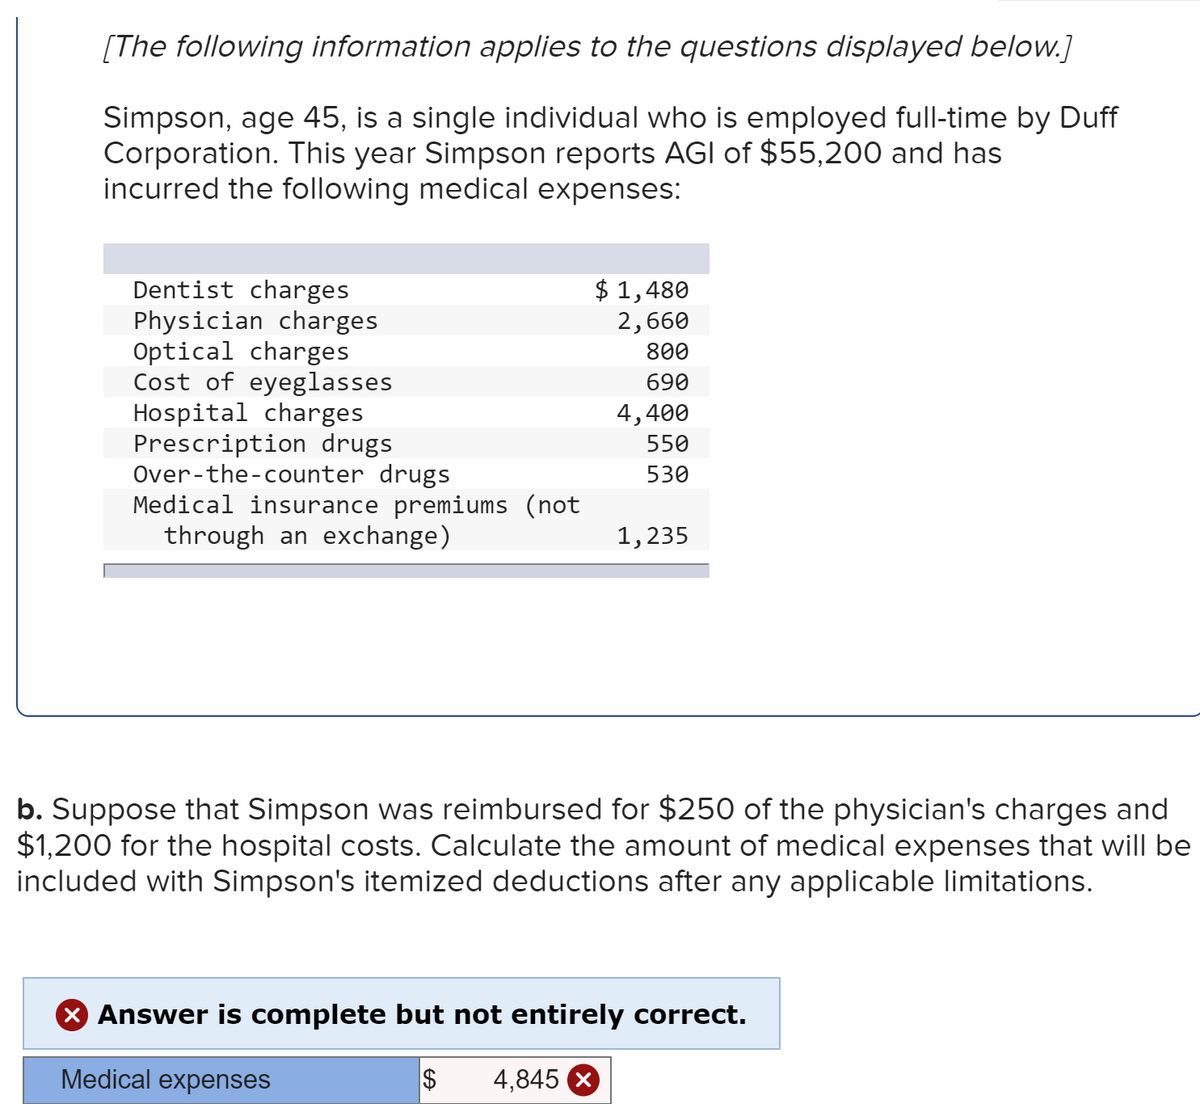 [The following information applies to the questions displayed below.]
Simpson, age 45, is a single individual who is employed full-time by Duff
Corporation. This year Simpson reports AGI of $55,200 and has
incurred the following medical expenses:
Dentist charges
Physician charges
Optical charges
Cost of eyeglasses
Hospital charges
Prescription drugs
Over-the-counter drugs
Medical insurance premiums (not
through an exchange)
$ 1,480
2,660
800
690
4,400
550
530
1,235
b. Suppose that Simpson was reimbursed for $250 of the physician's charges and
$1,200 for the hospital costs. Calculate the amount of medical expenses that will be
included with Simpson's itemized deductions after any applicable limitations.
X Answer is complete but not entirely correct.
Medical expenses
4,845 X
